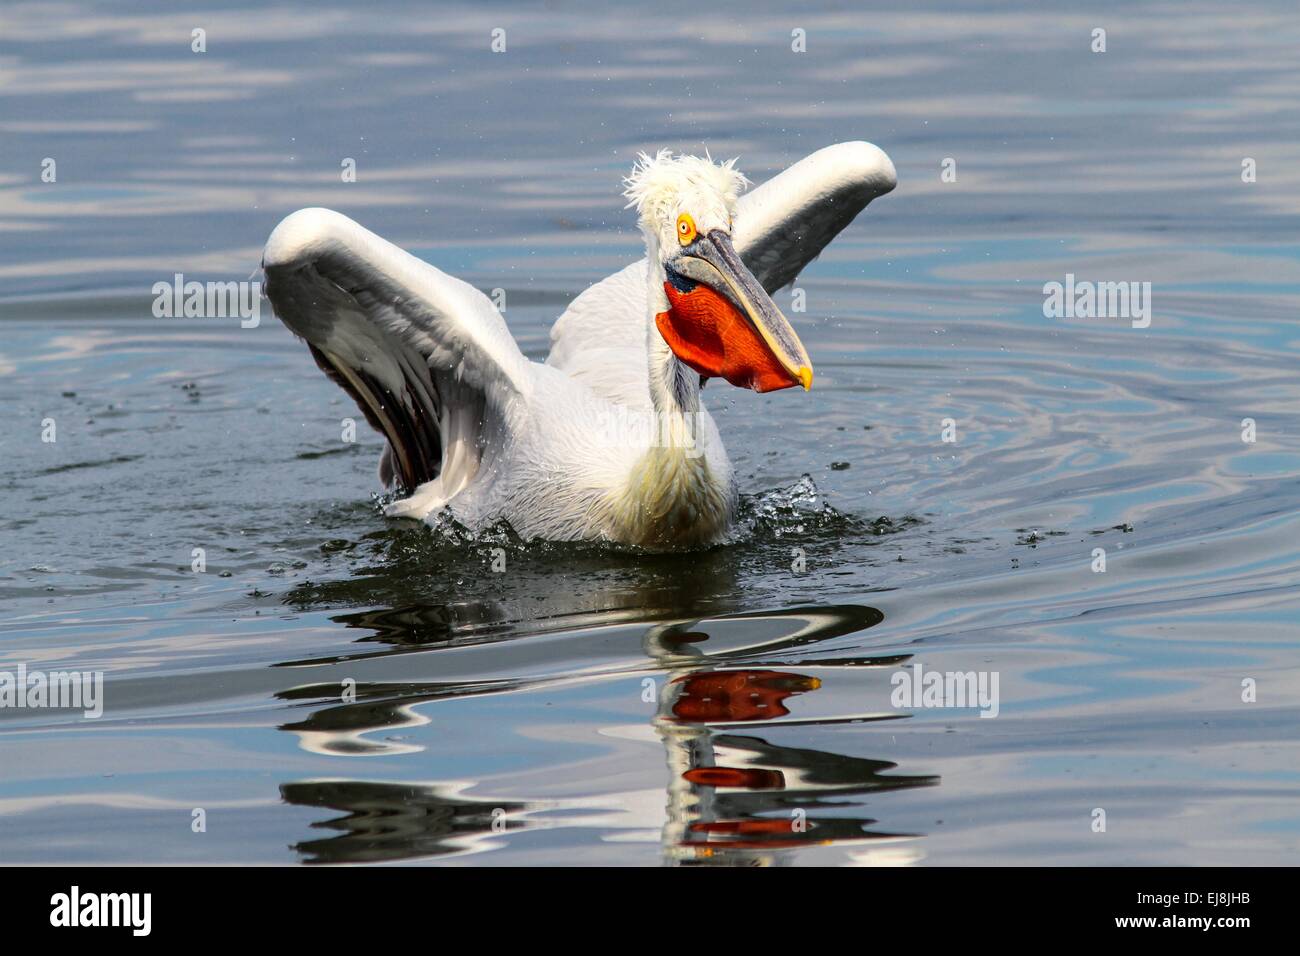 Curious pelican swimming Stock Photo